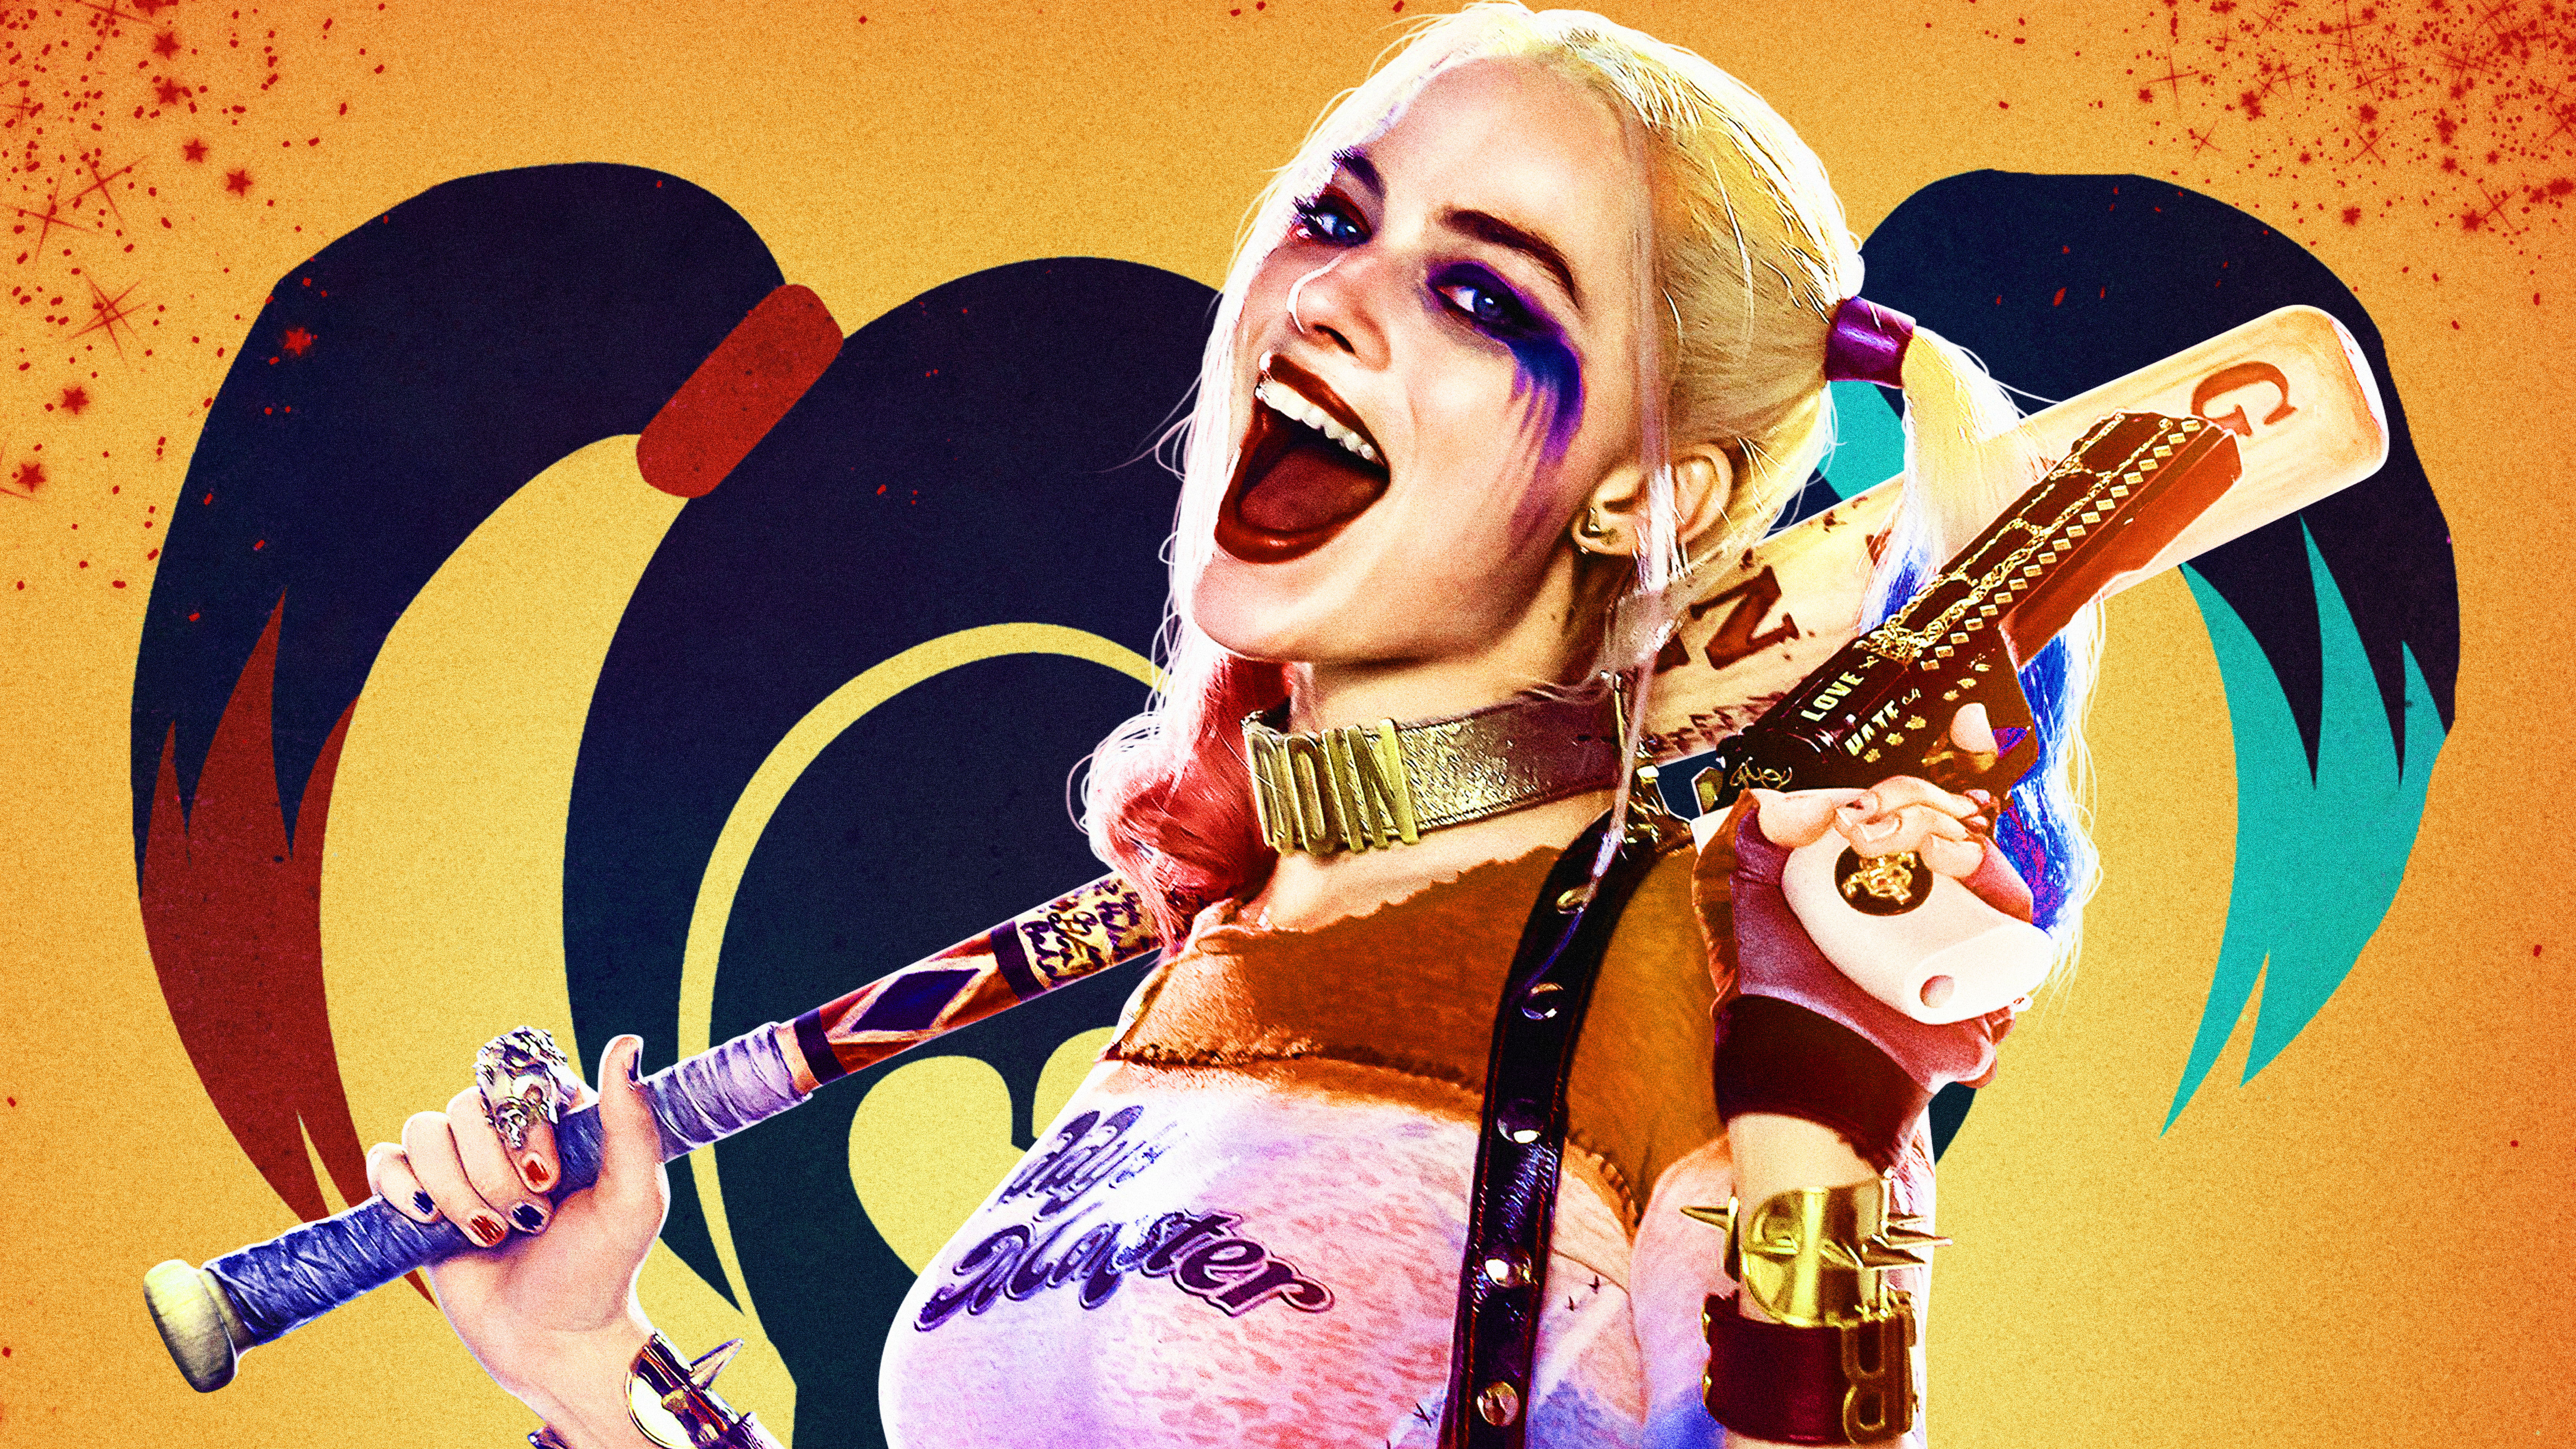 Harley Quinn in Suicide Squad 4K 8K Wallpapers